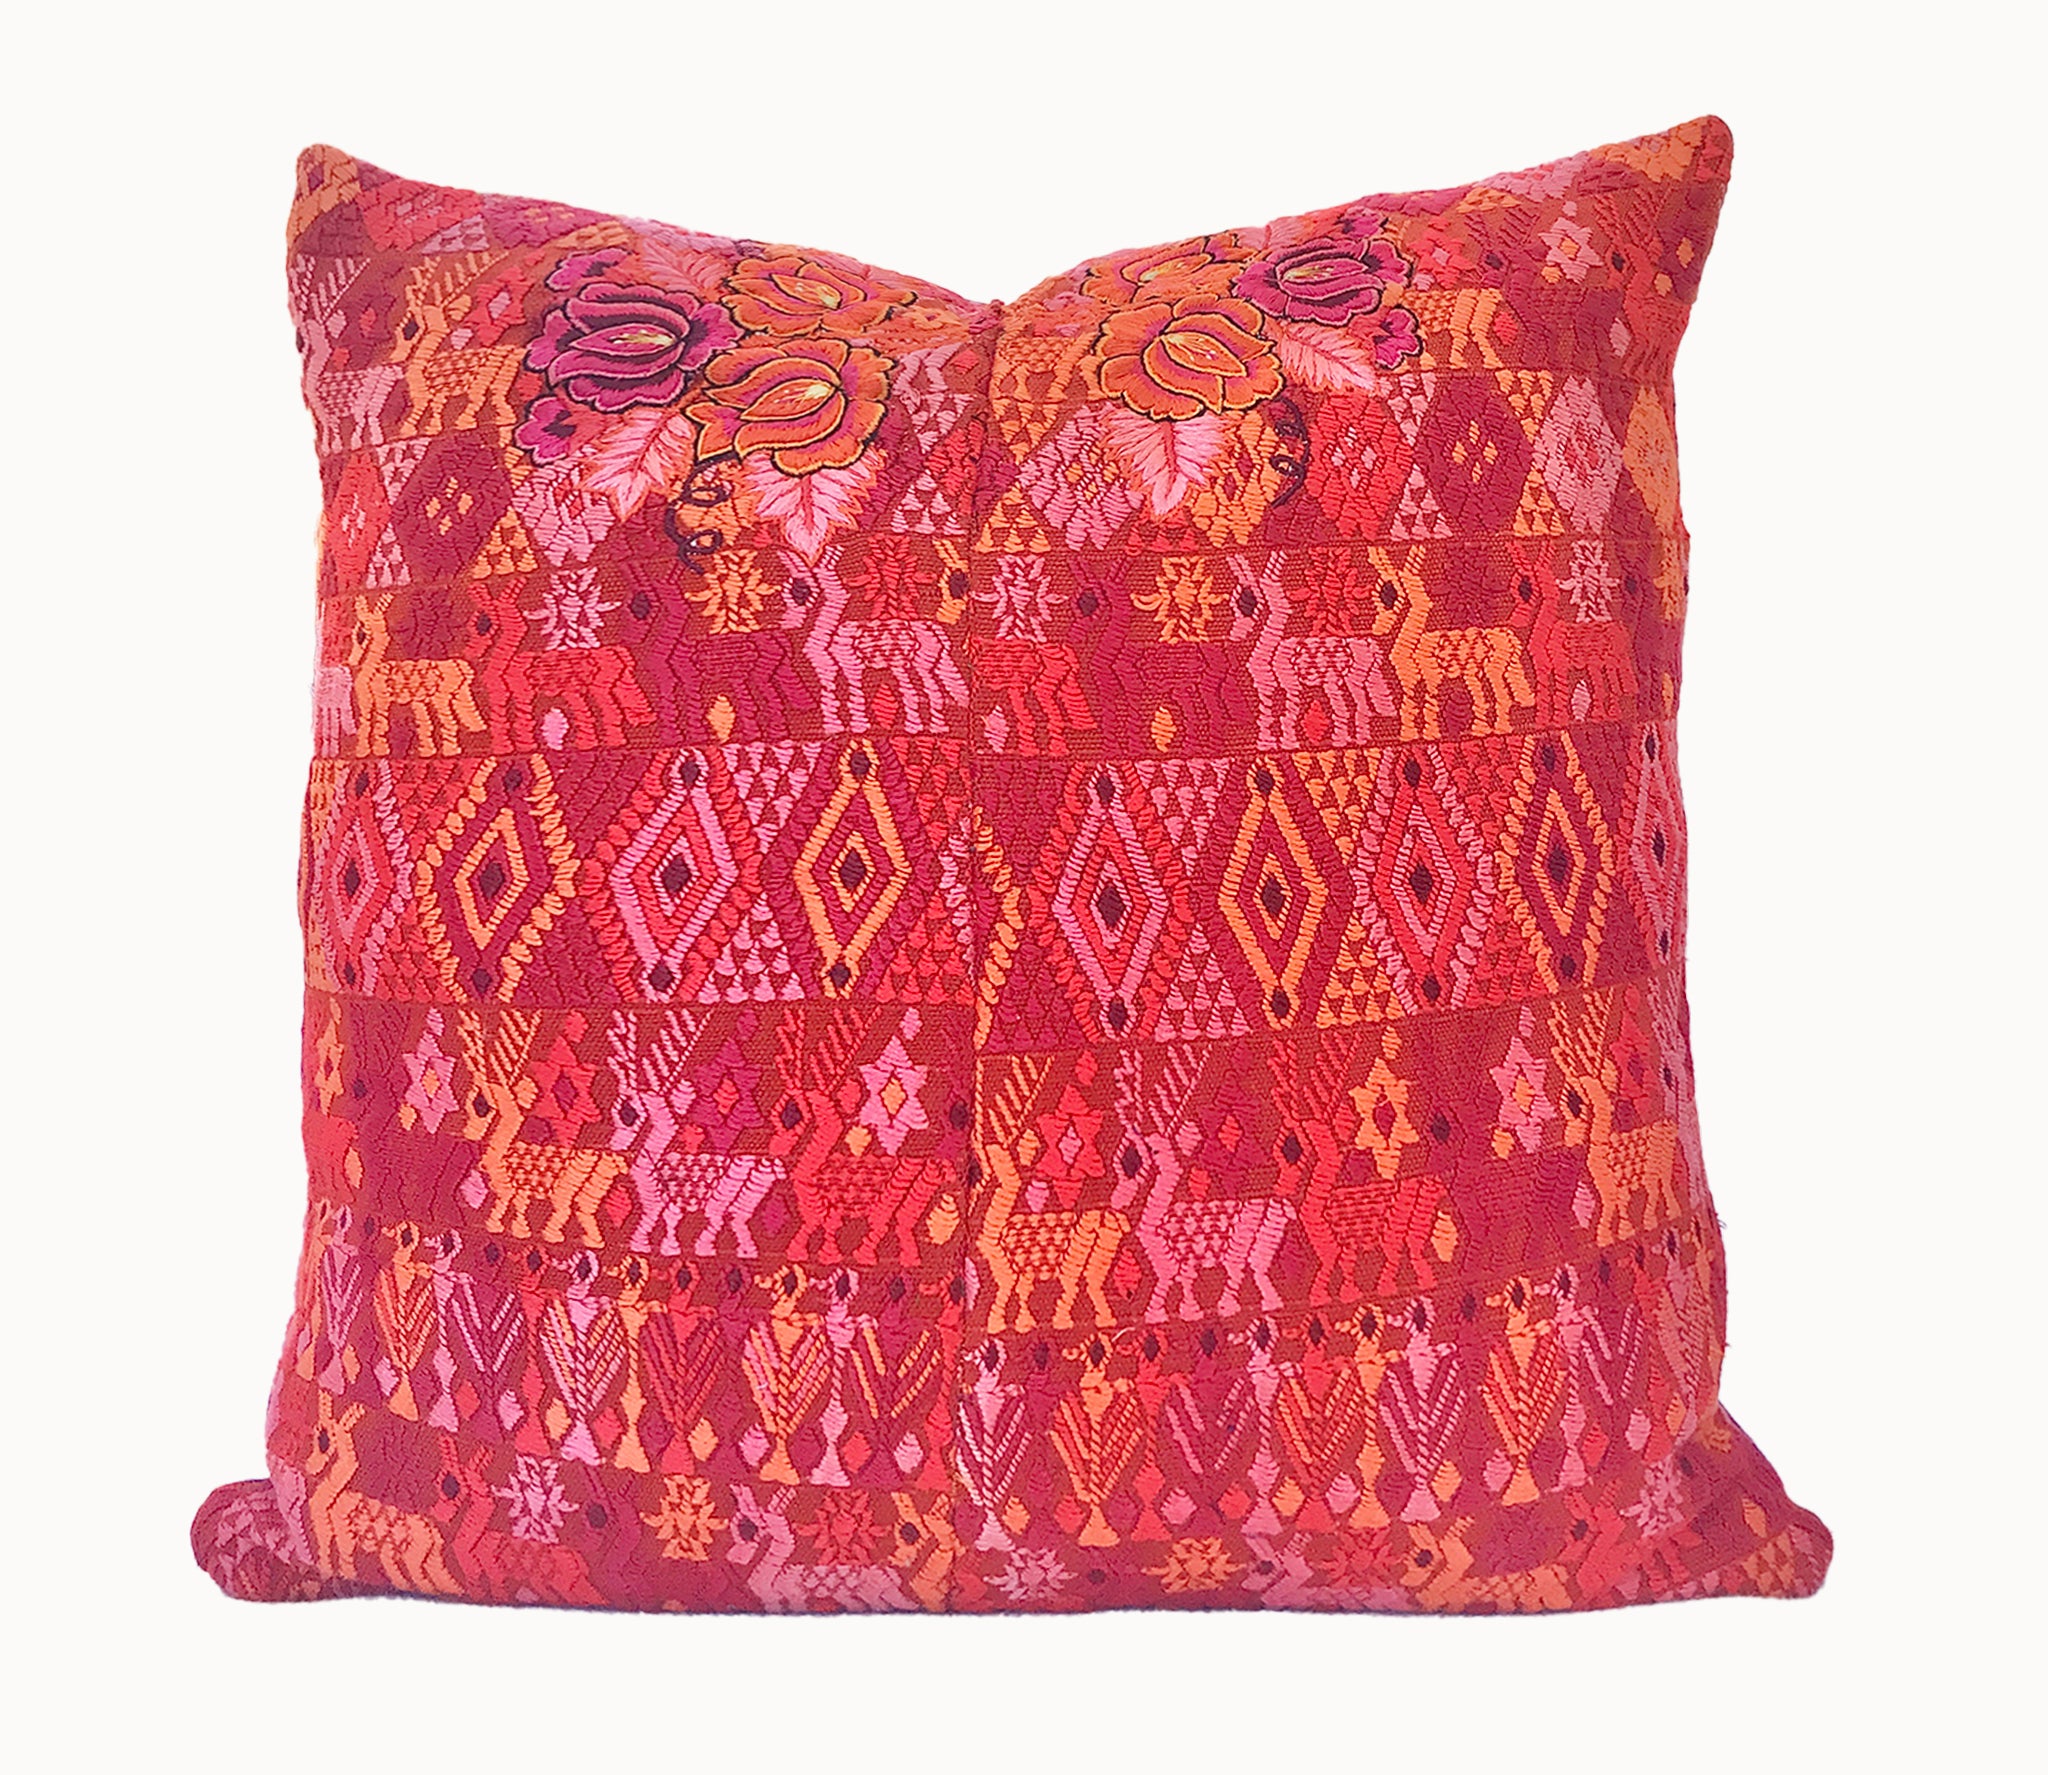 Vintage textile cushions made from a Guatemalan huipil and corte.